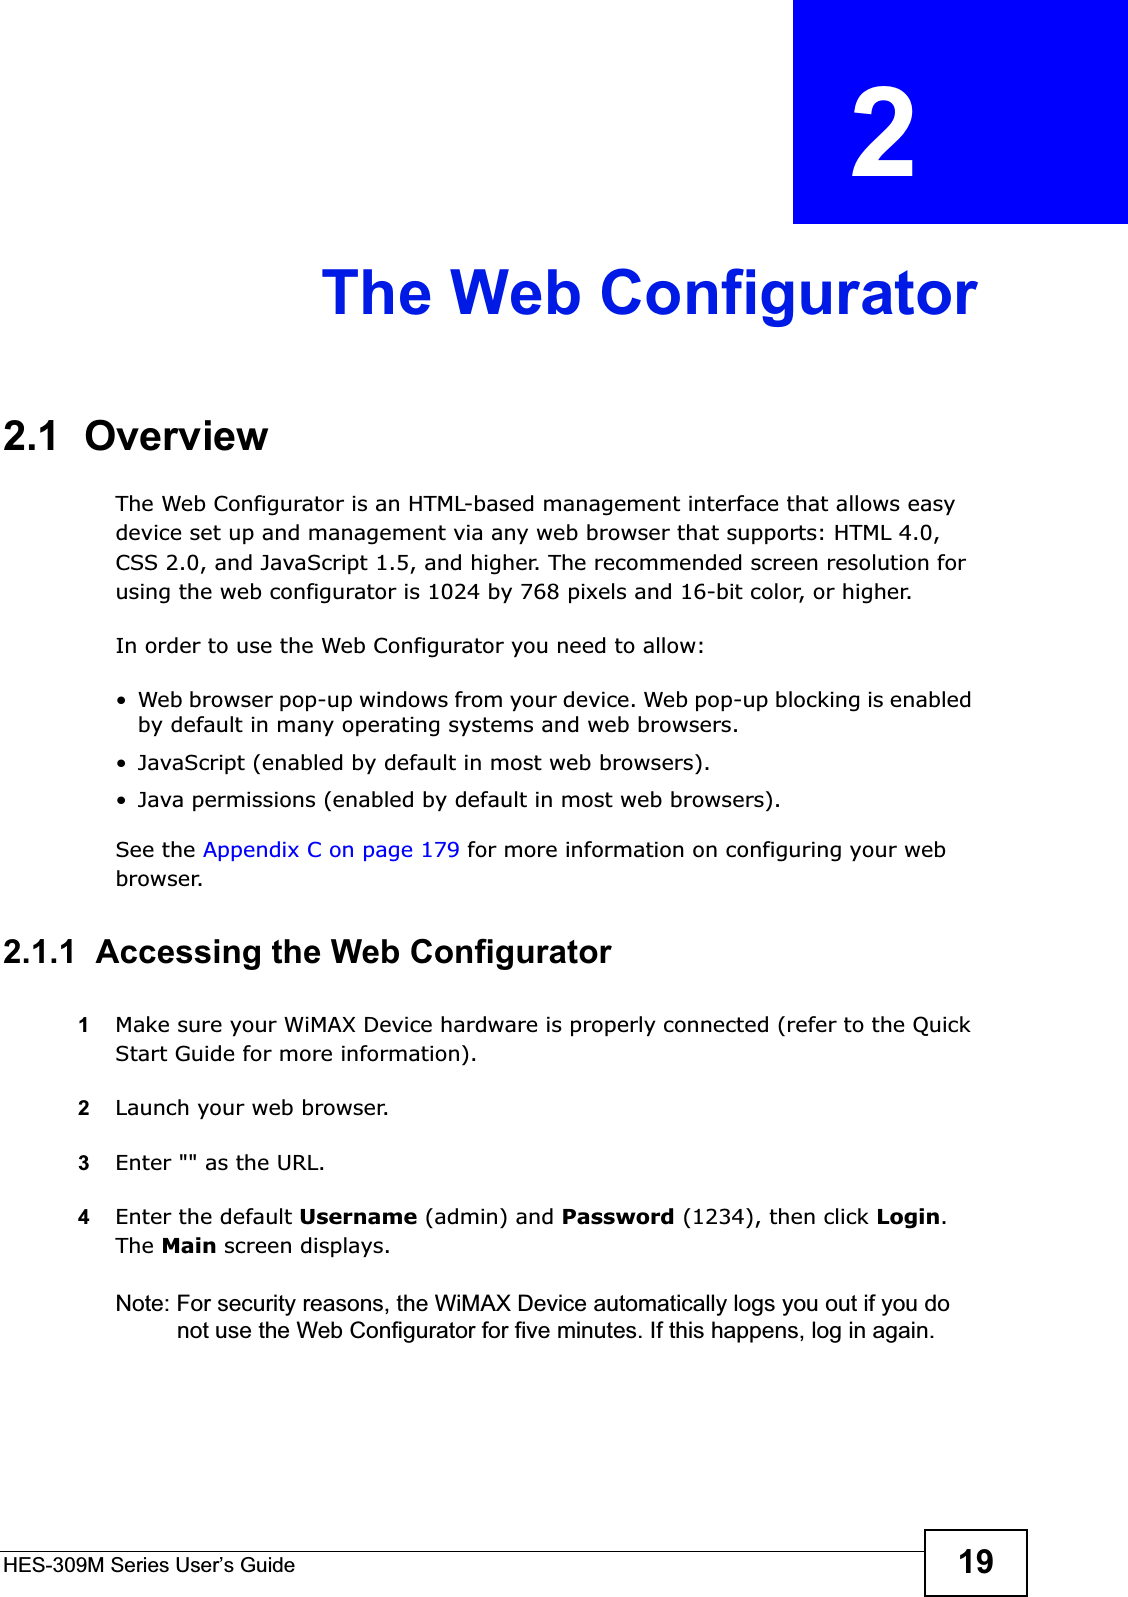 HES-309M Series User’s Guide 19CHAPTER  2 The Web Configurator2.1  OverviewThe Web Configurator is an HTML-based management interface that allows easy device set up and management via any web browser that supports: HTML 4.0, CSS 2.0, and JavaScript 1.5, and higher. The recommended screen resolution for using the web configurator is 1024 by 768 pixels and 16-bit color, or higher.In order to use the Web Configurator you need to allow:• Web browser pop-up windows from your device. Web pop-up blocking is enabled by default in many operating systems and web browsers.• JavaScript (enabled by default in most web browsers).• Java permissions (enabled by default in most web browsers).See the Appendix C on page 179 for more information on configuring your web browser.2.1.1  Accessing the Web Configurator1Make sure your WiMAX Device hardware is properly connected (refer to the Quick Start Guide for more information).2Launch your web browser.3Enter &quot;&quot; as the URL.4Enter the default Username (admin) and Password (1234), then click Login.The Main screen displays.Note: For security reasons, the WiMAX Device automatically logs you out if you do not use the Web Configurator for five minutes. If this happens, log in again.